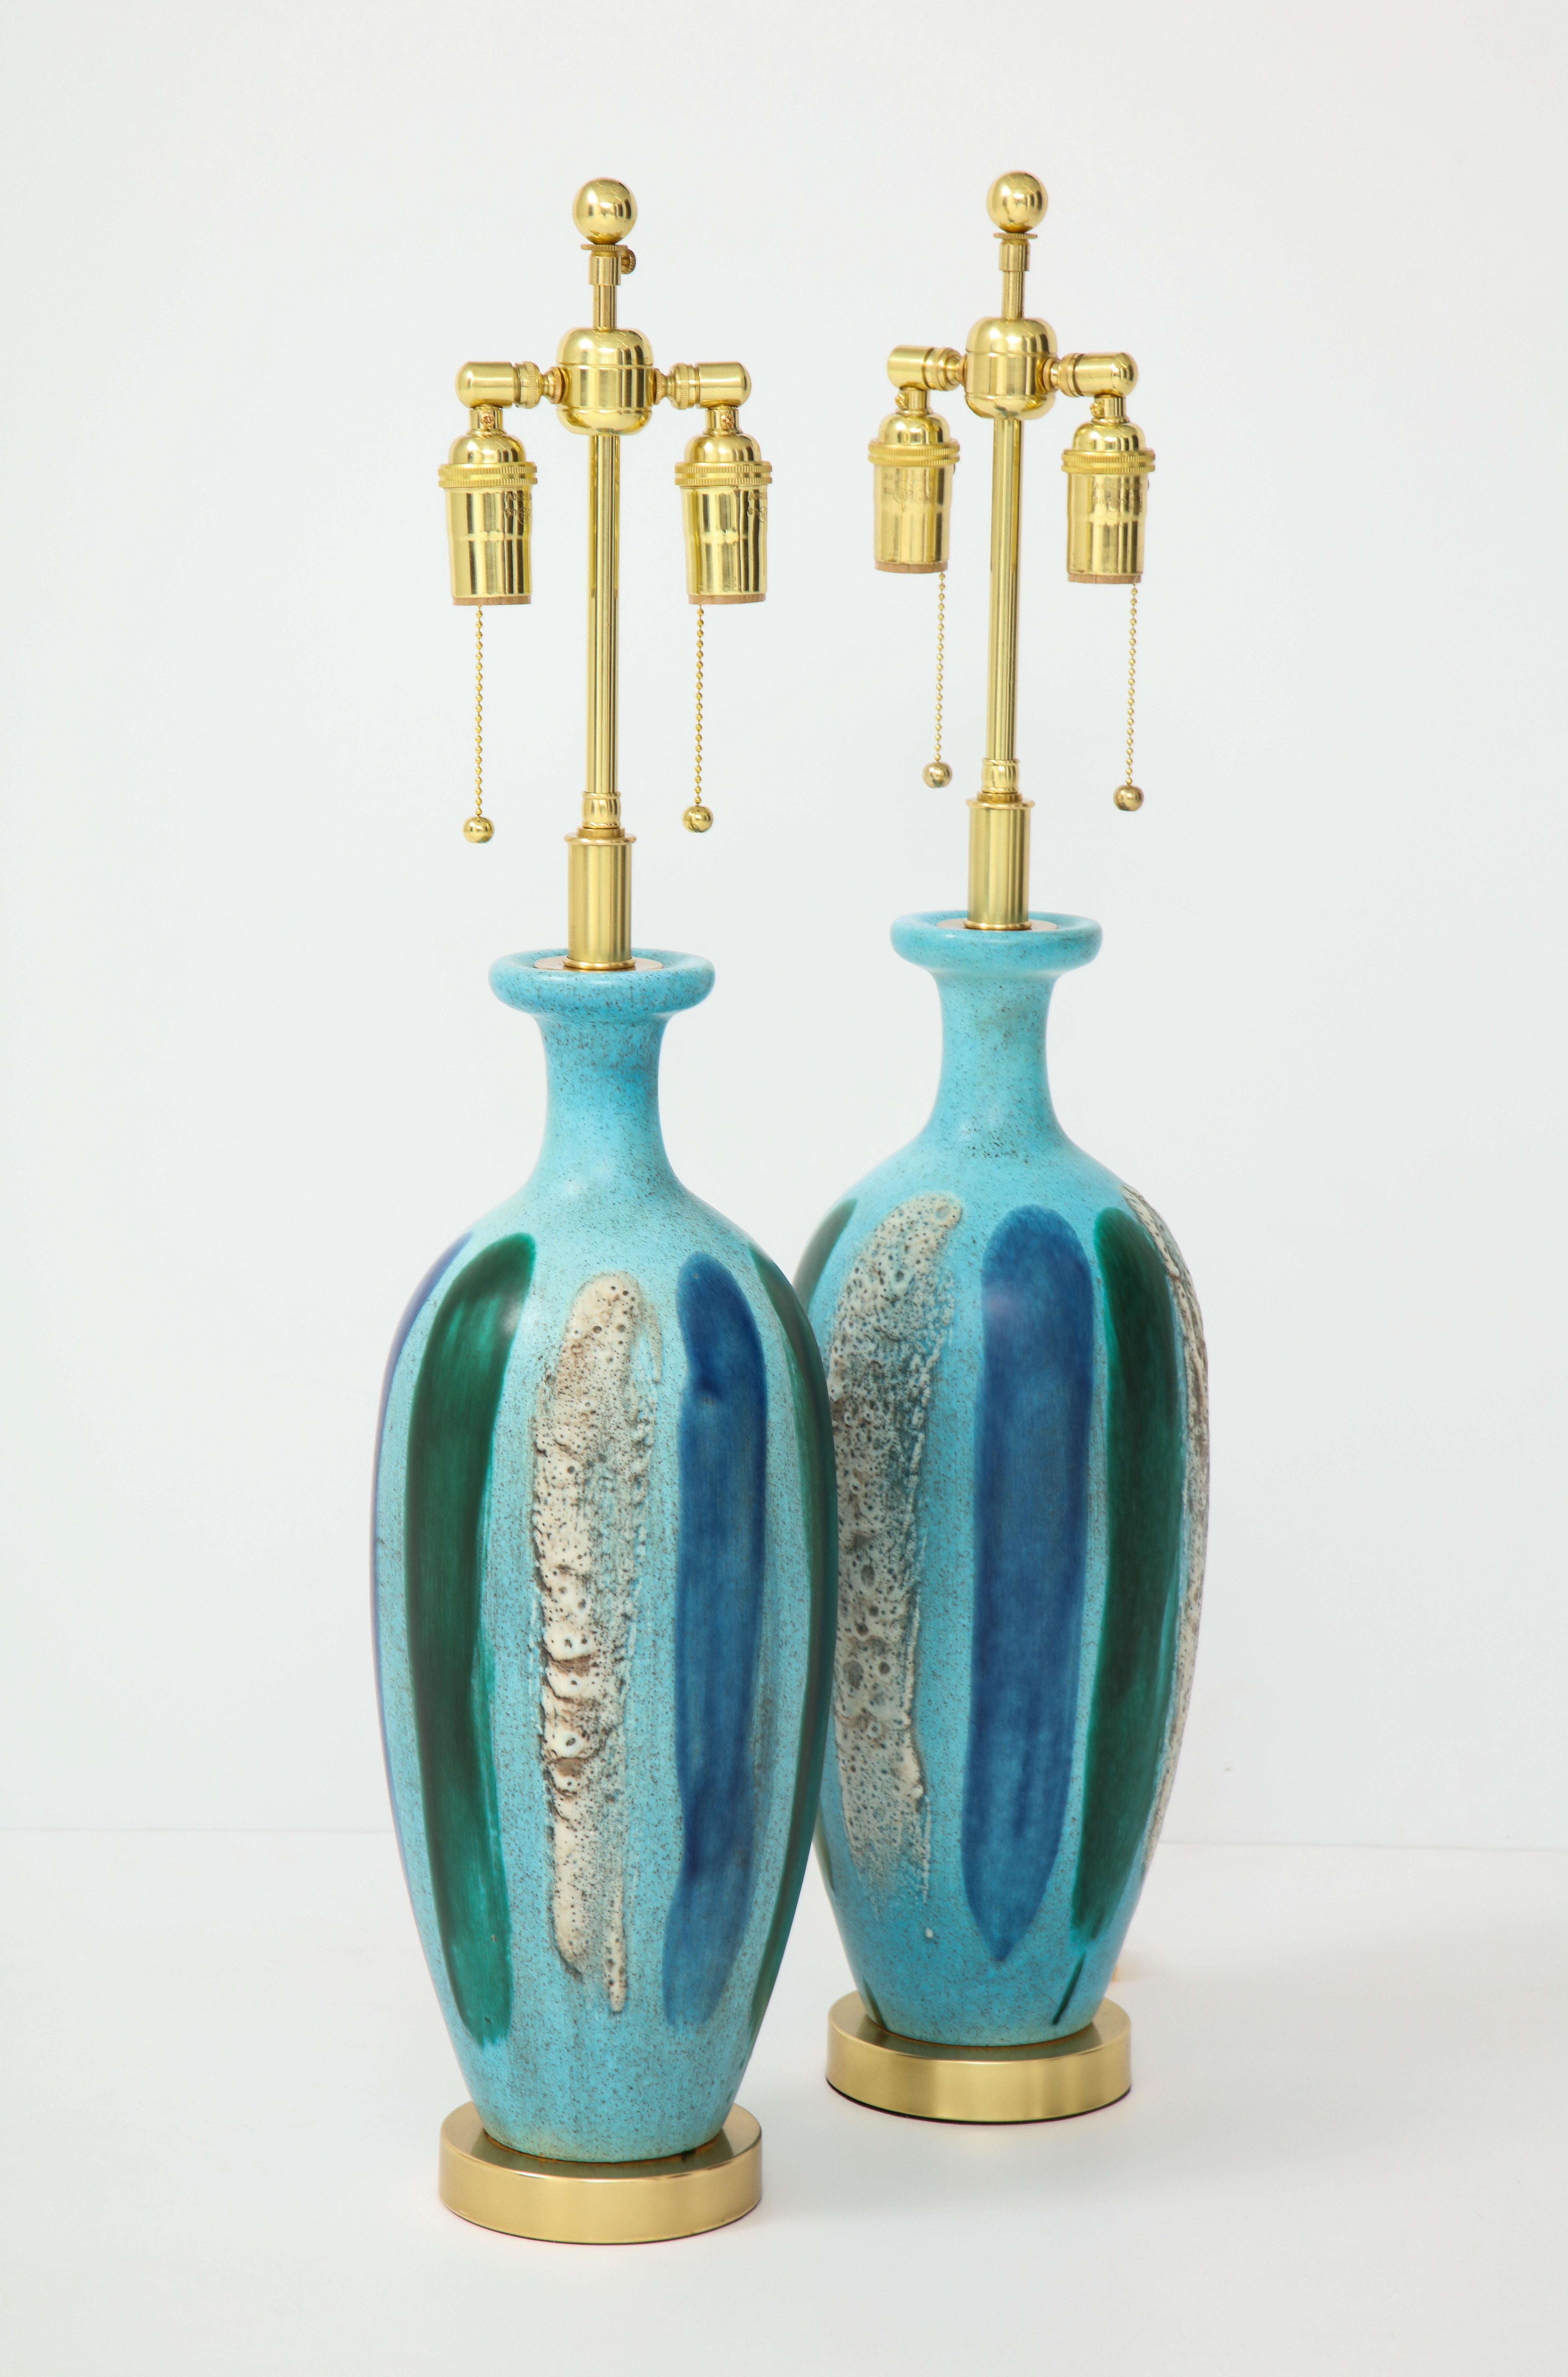 Pair of 1960s Italian ceramic lamps.
The lamps are mounted on polished brass bases and they have
been newly rewired with brass double clusters.